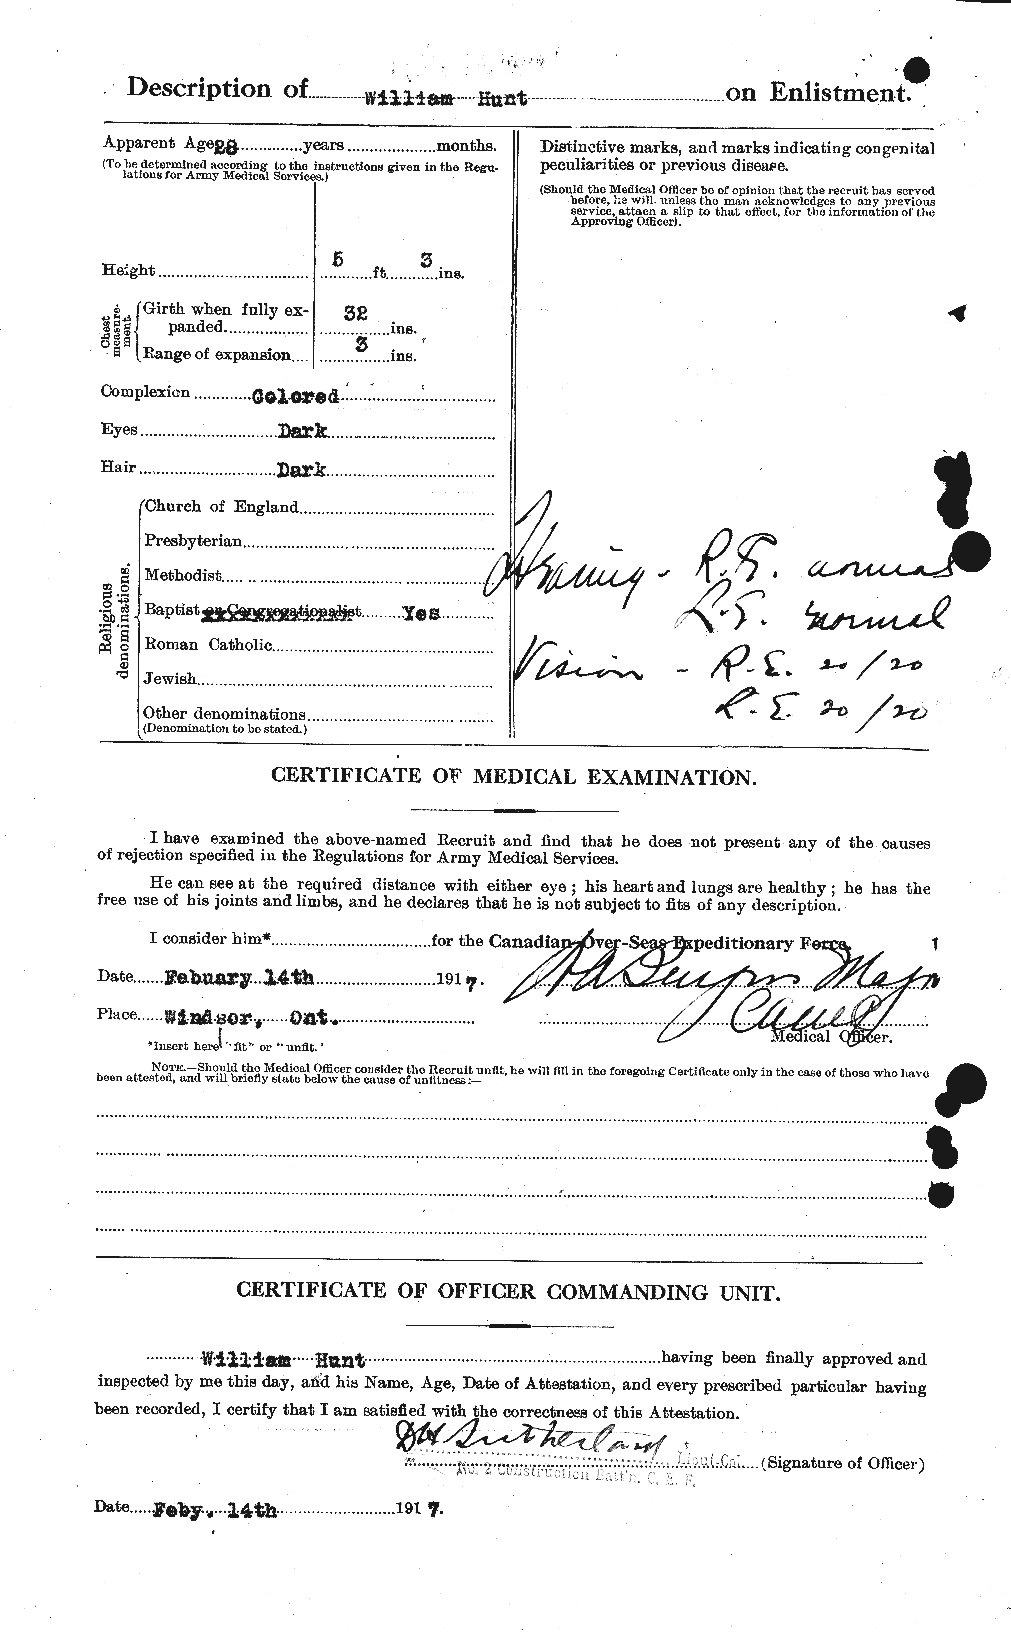 Personnel Records of the First World War - CEF 408901b